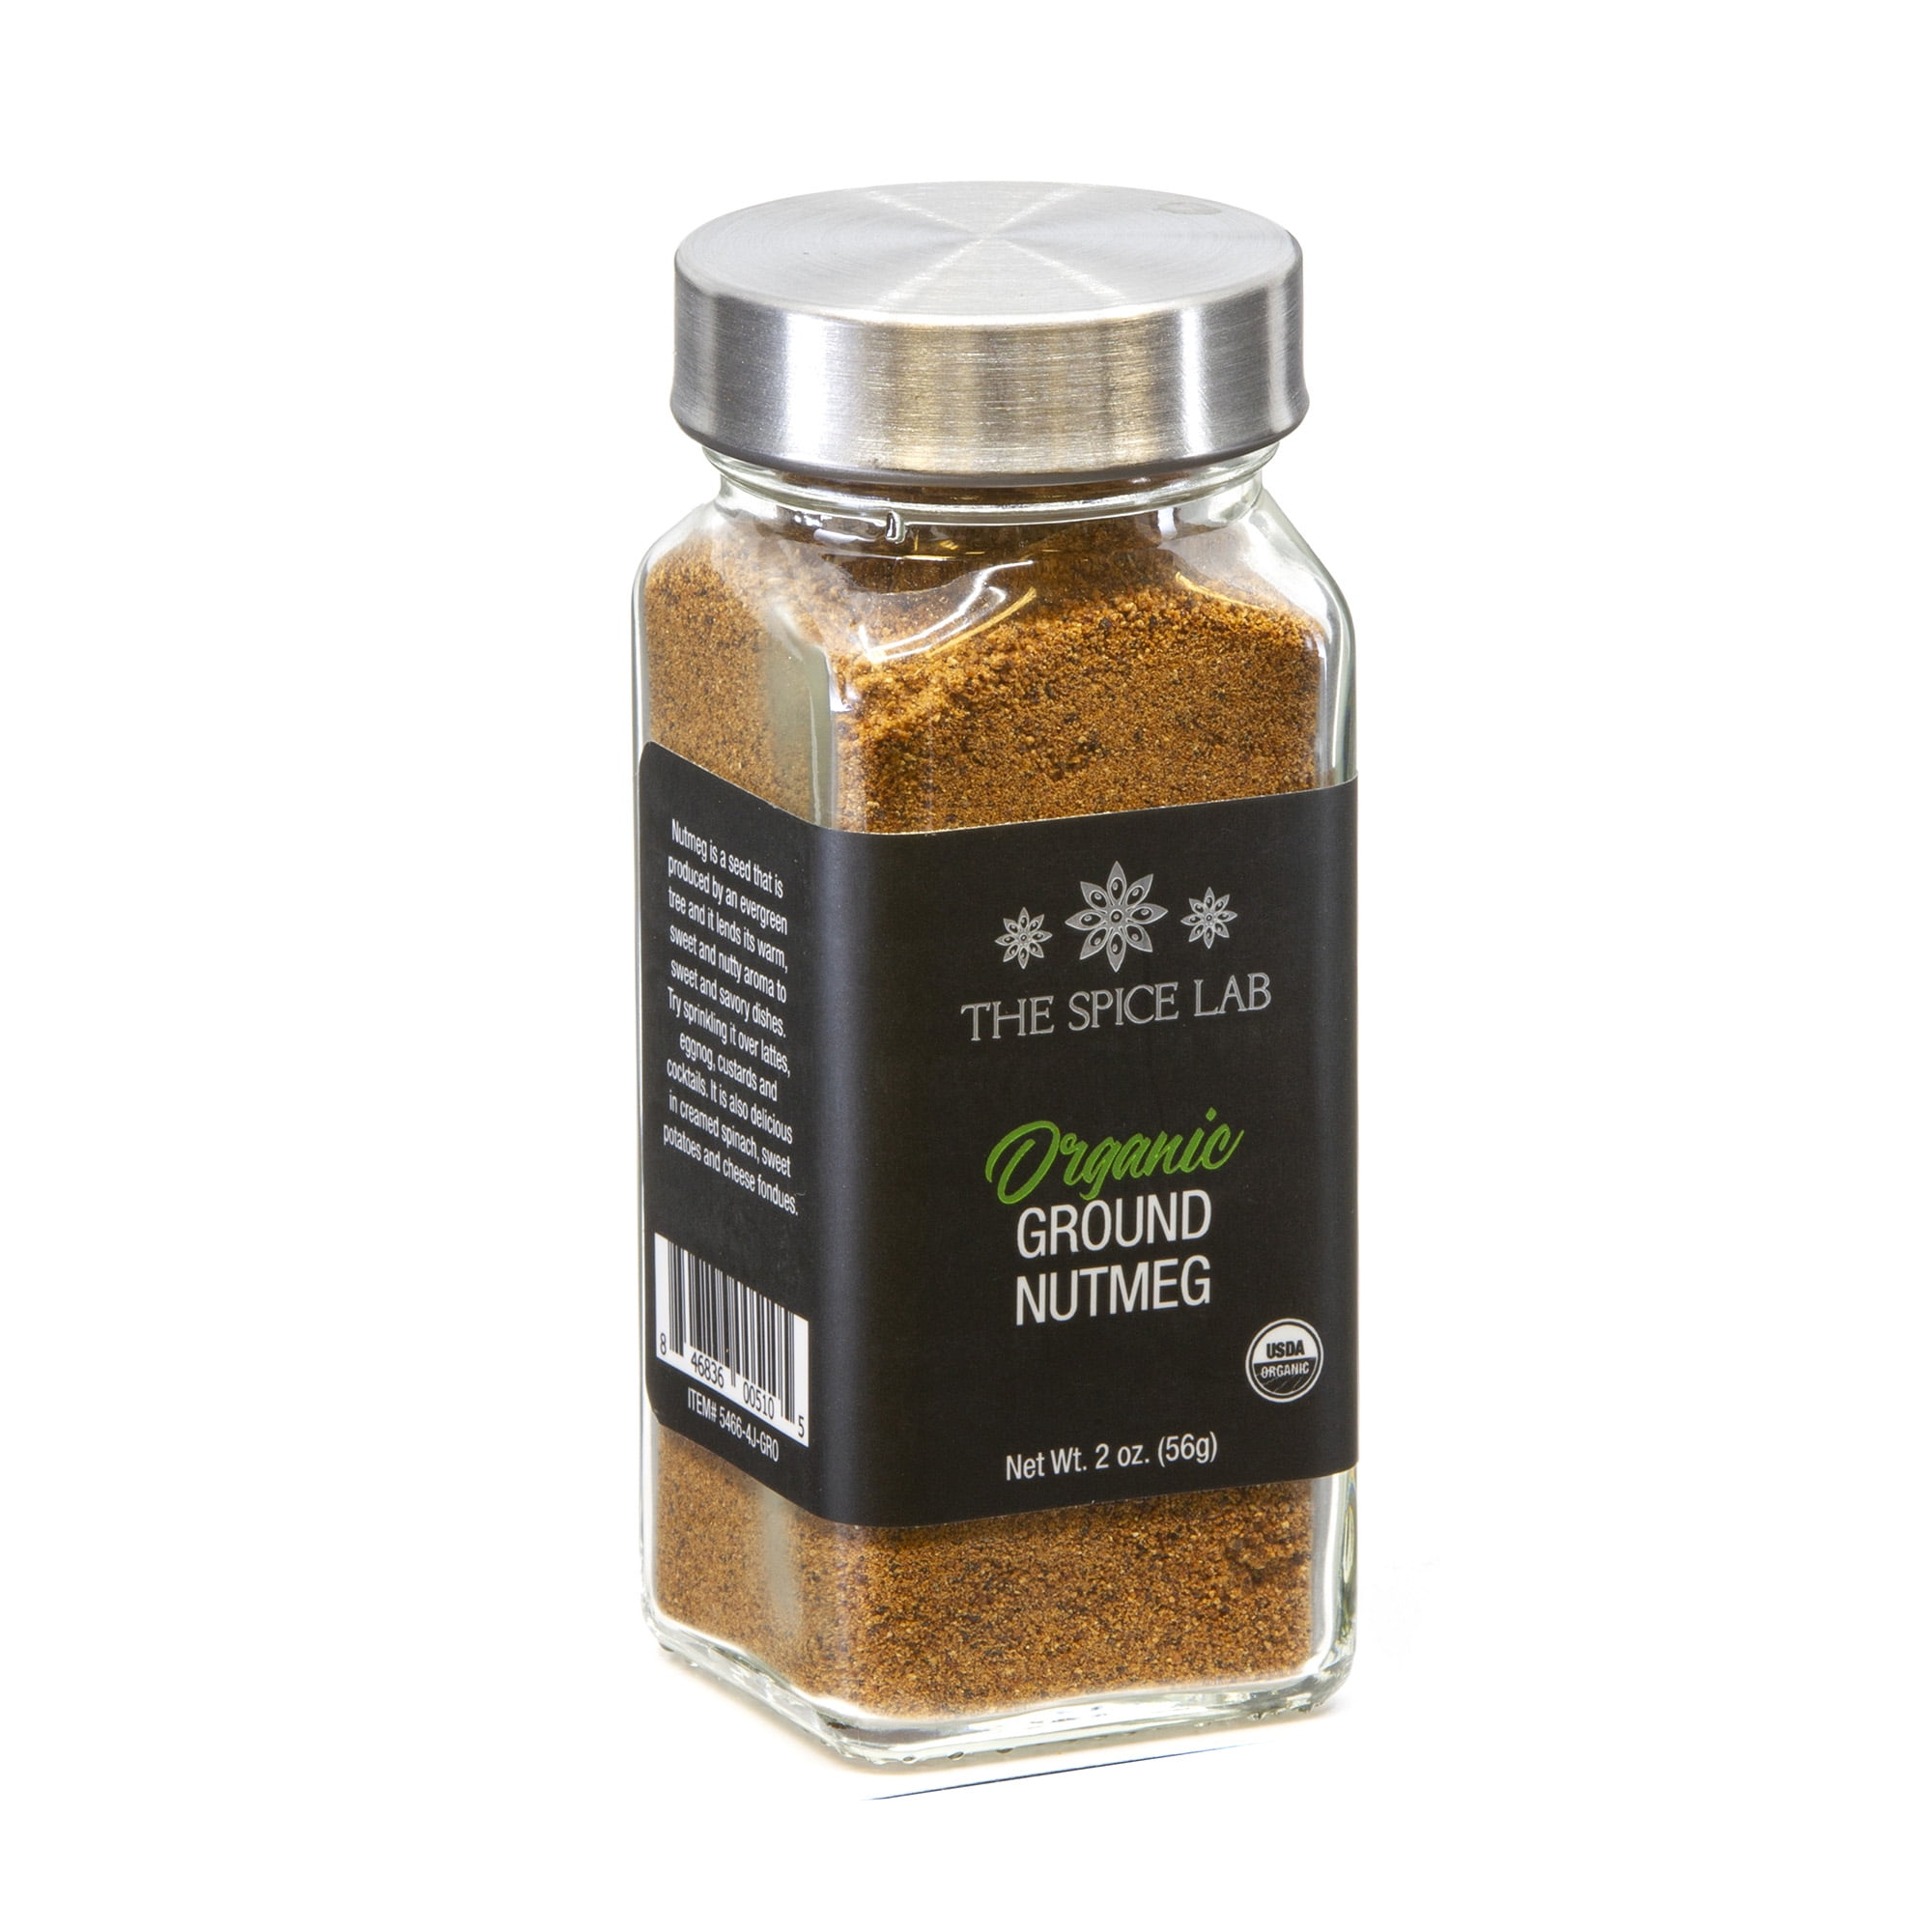 Filé Powder  Local Spice From Louisiana, United States of America